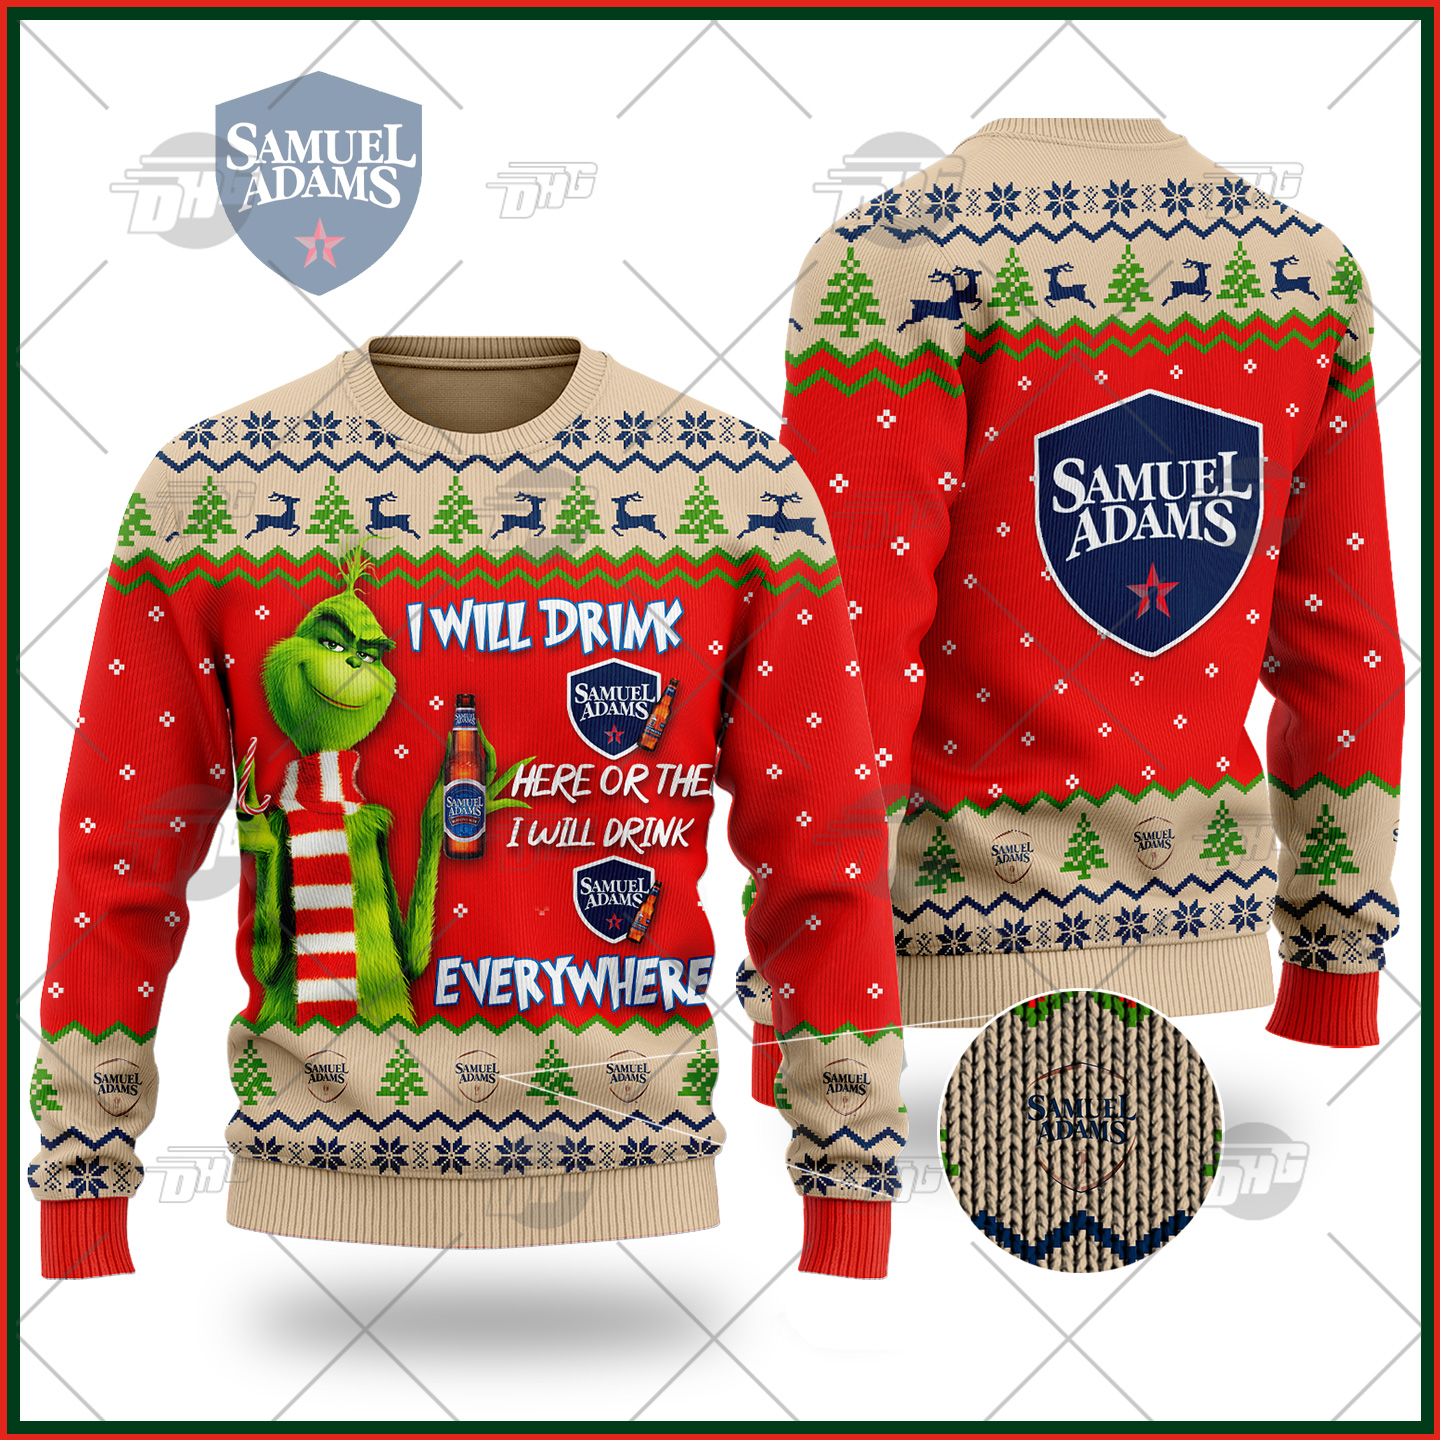 Grinch I Will Drink Here Or There I Will Drink Everywhere Samuel Adams Beer Ugly Sweater